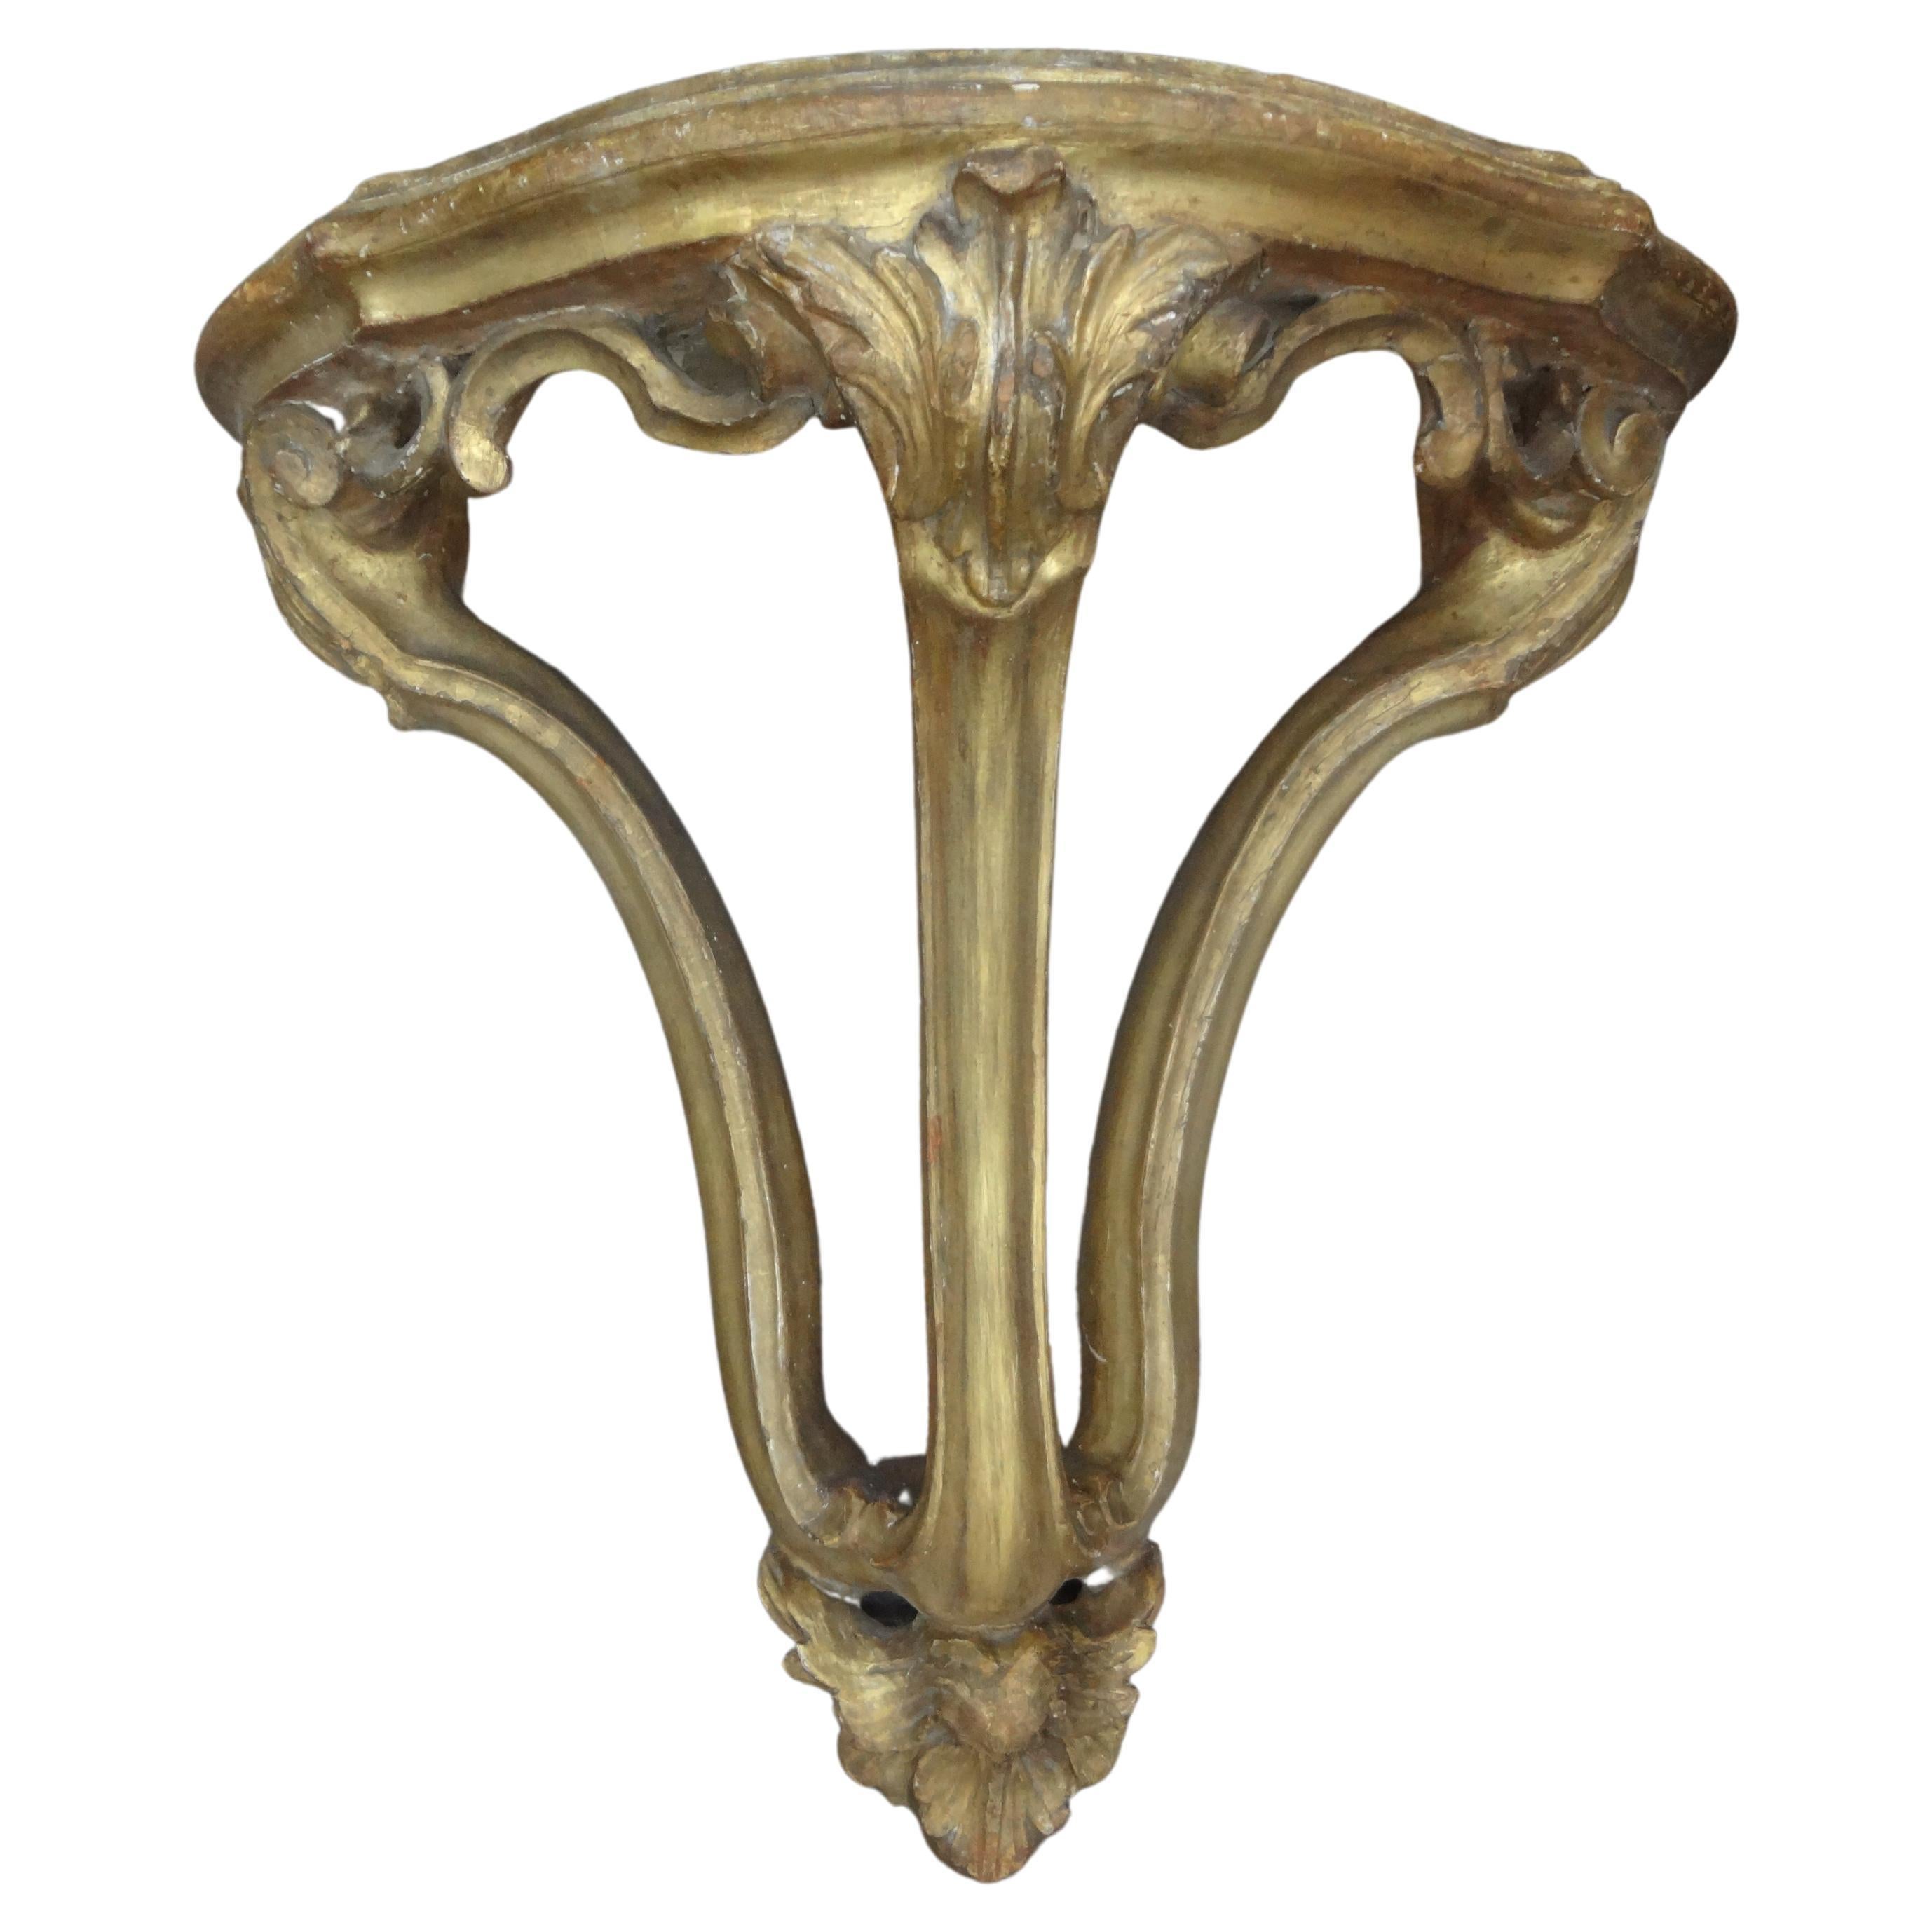 Large pair of 18th century Italian Baroque giltwood wall brackets.
These gorgeous large scale 18th century Italian giltwood wall brackets, wall consoles or wall shelves are statement pieces. Appropriate scale to accommodate a large pair of vases,